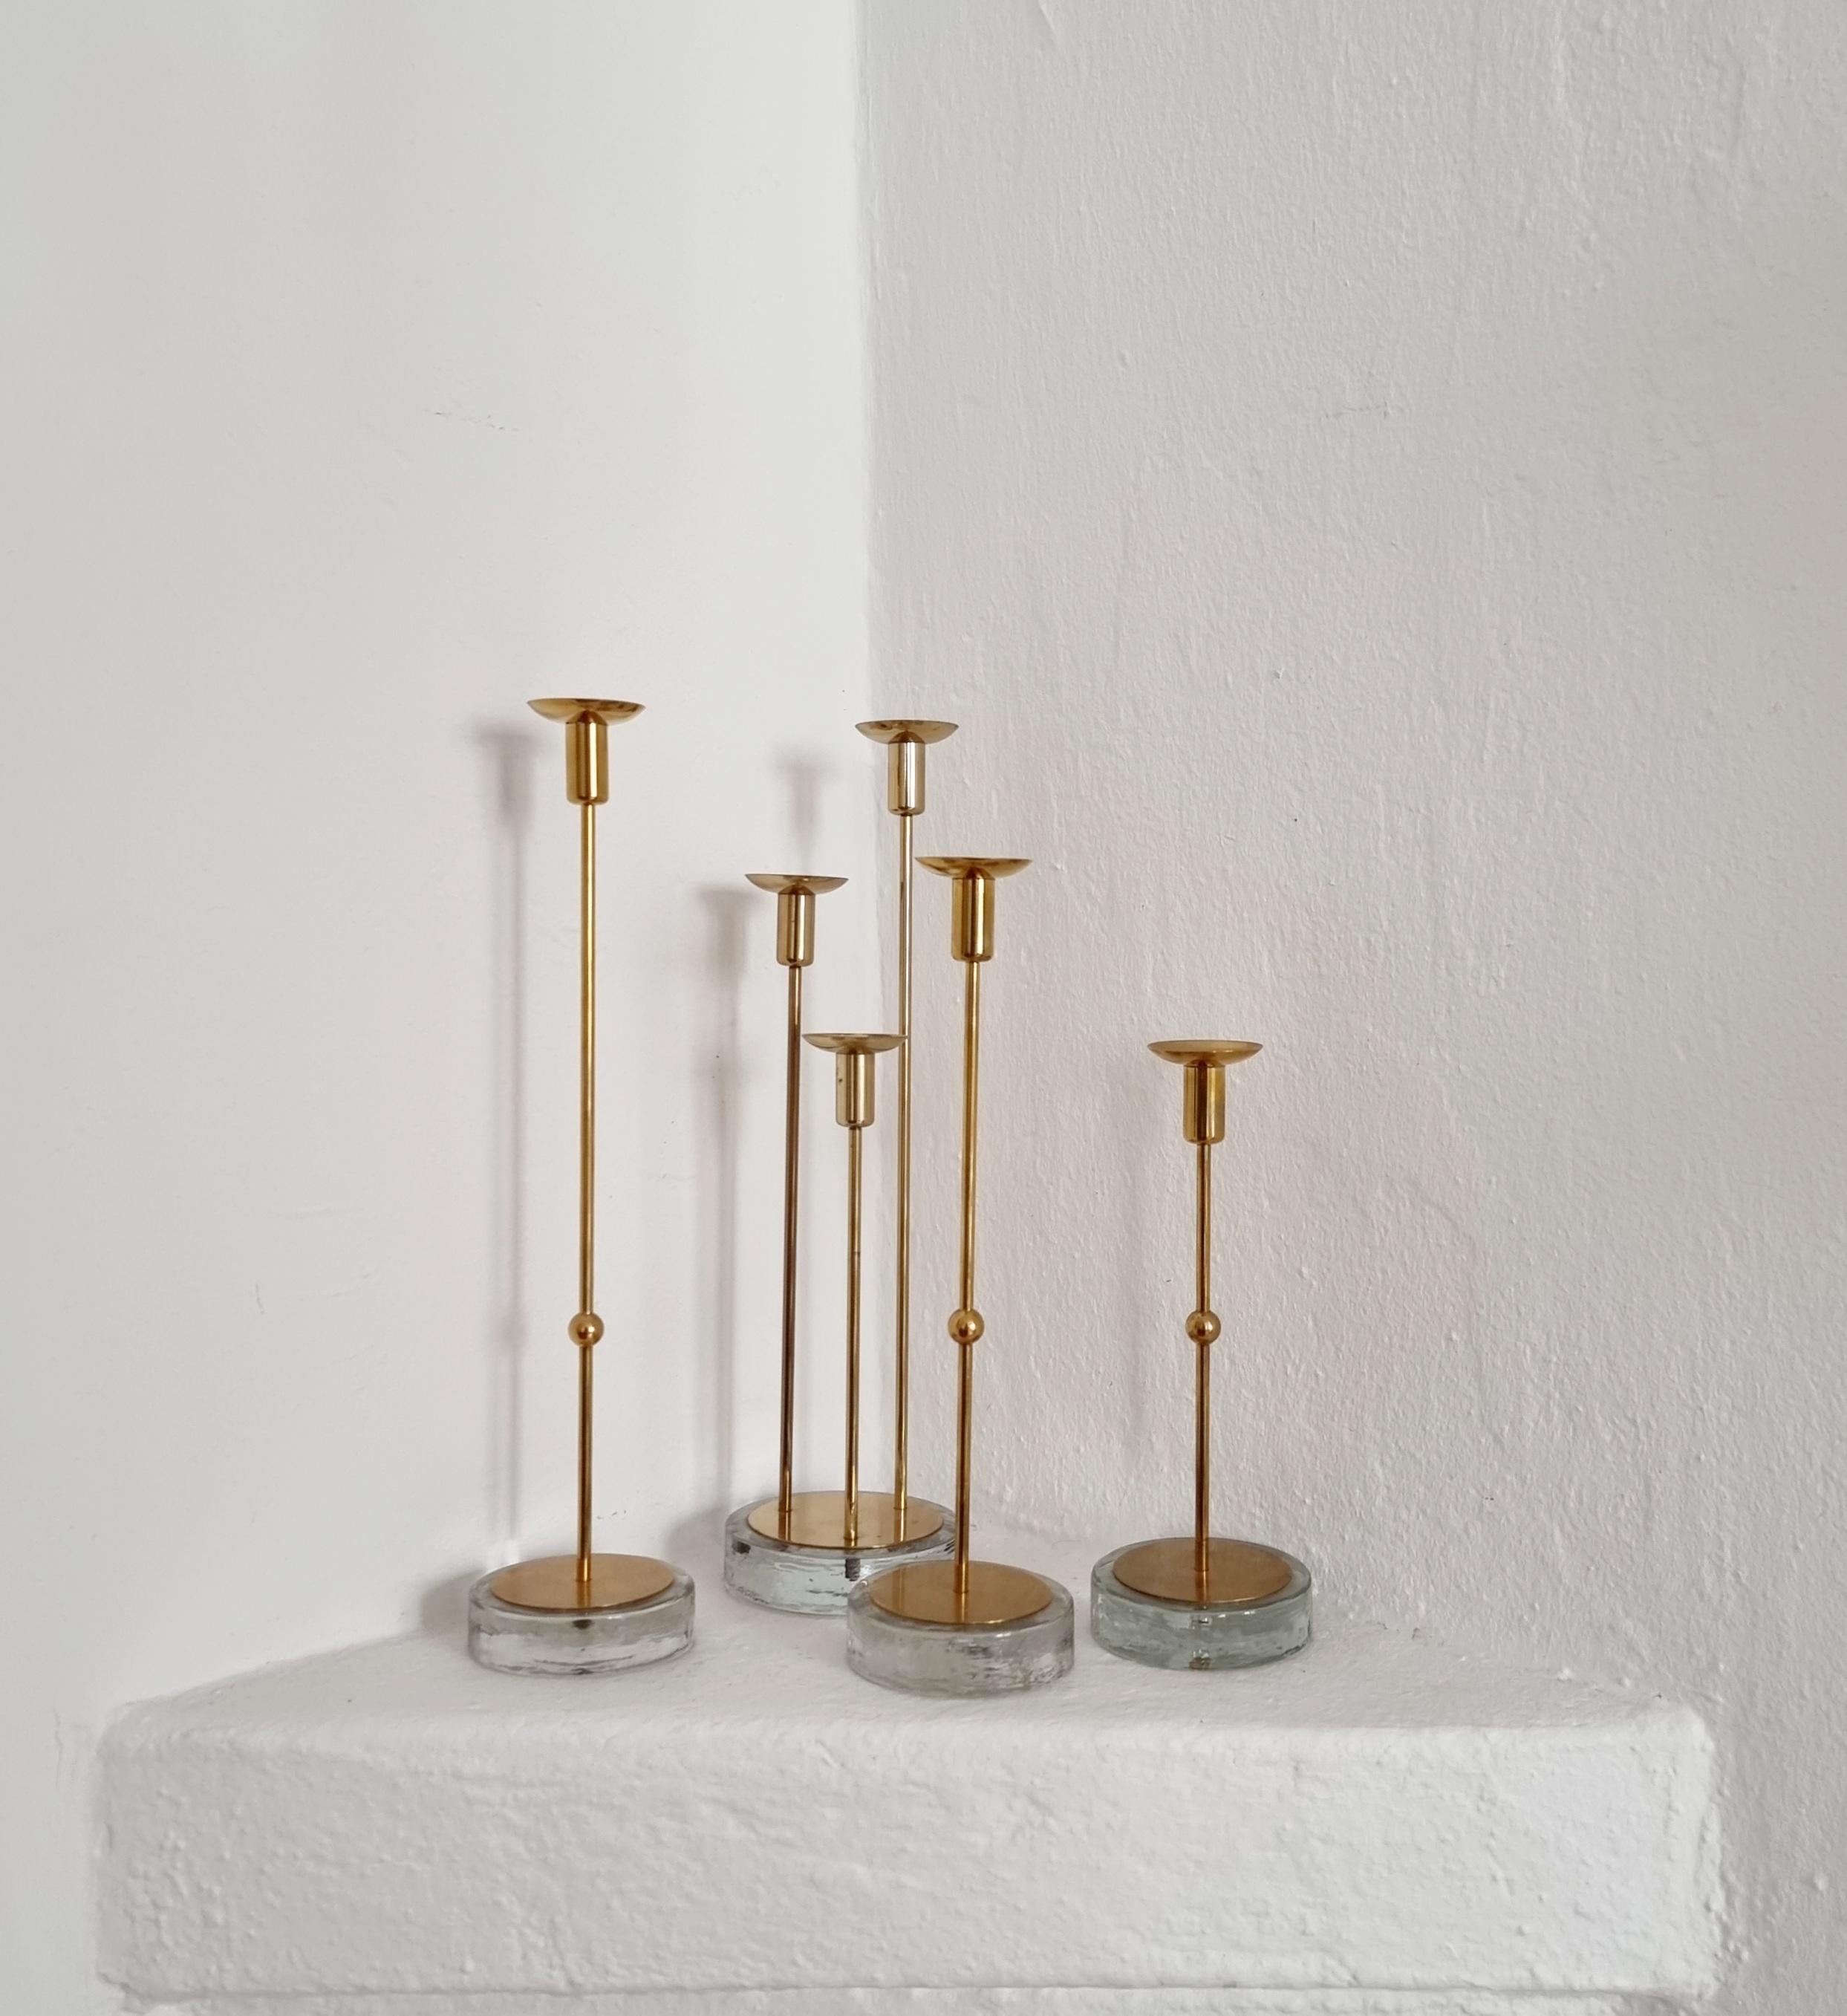 A rare set of four candle holders, one for three candles (total for six candles). Delicate shape, still stabile, a decorative set for thin candles. Designed by Gunnar Ander for Ystad Metall, Sweden 1960s. In solid brass with glass base. 

A box